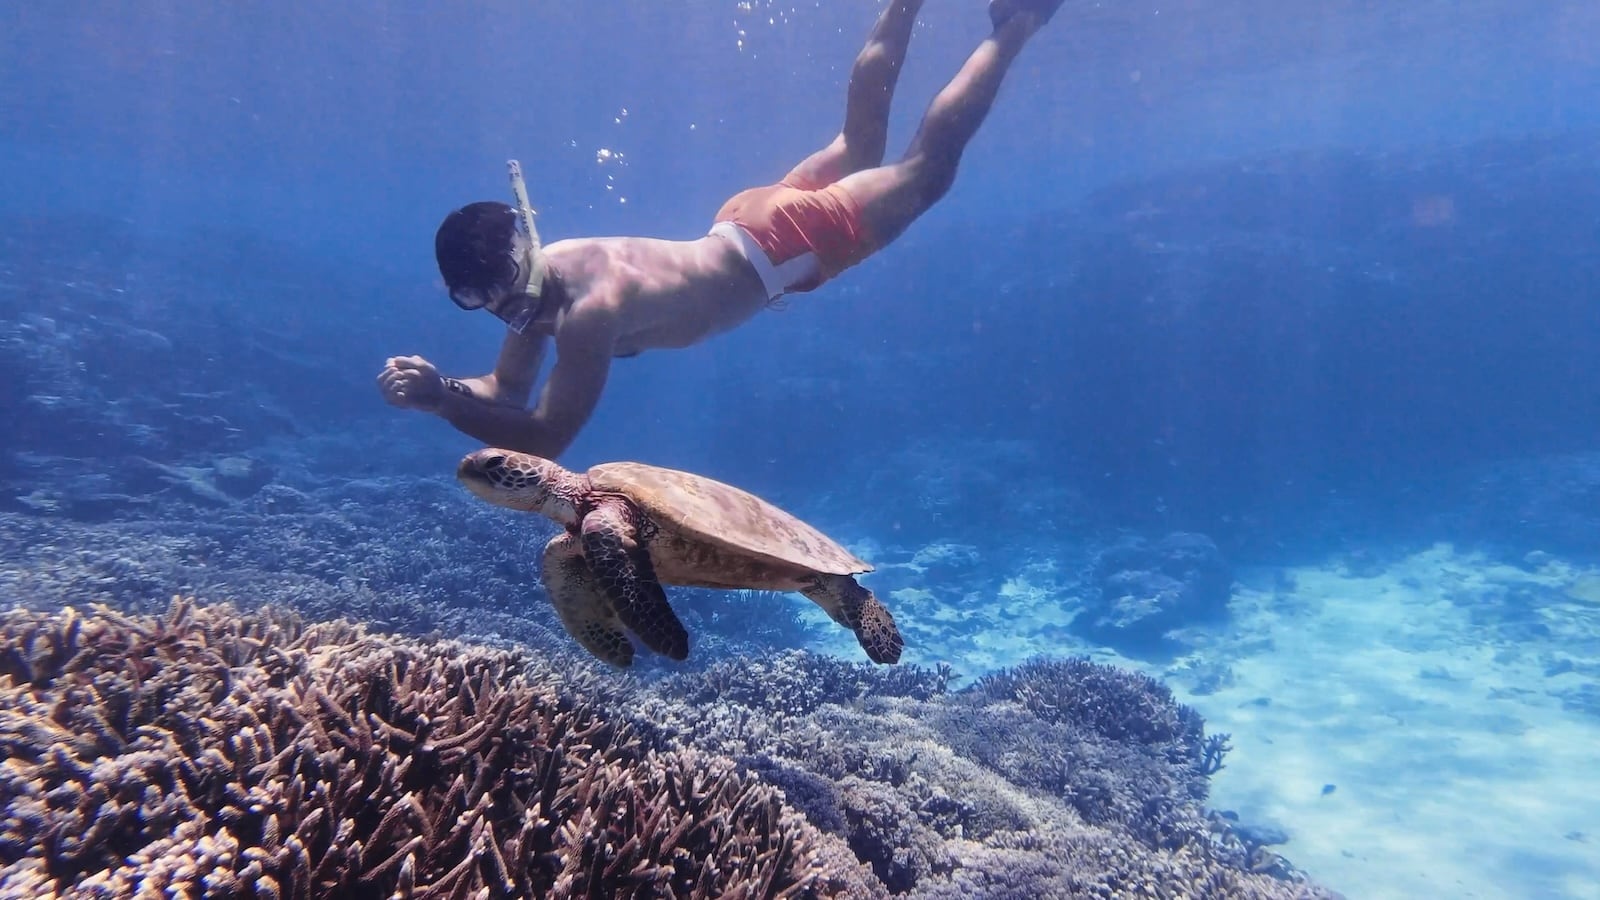 Stefan snorkeling next to a turtle in the Great Barrier Reef at Lady Elliot Island.